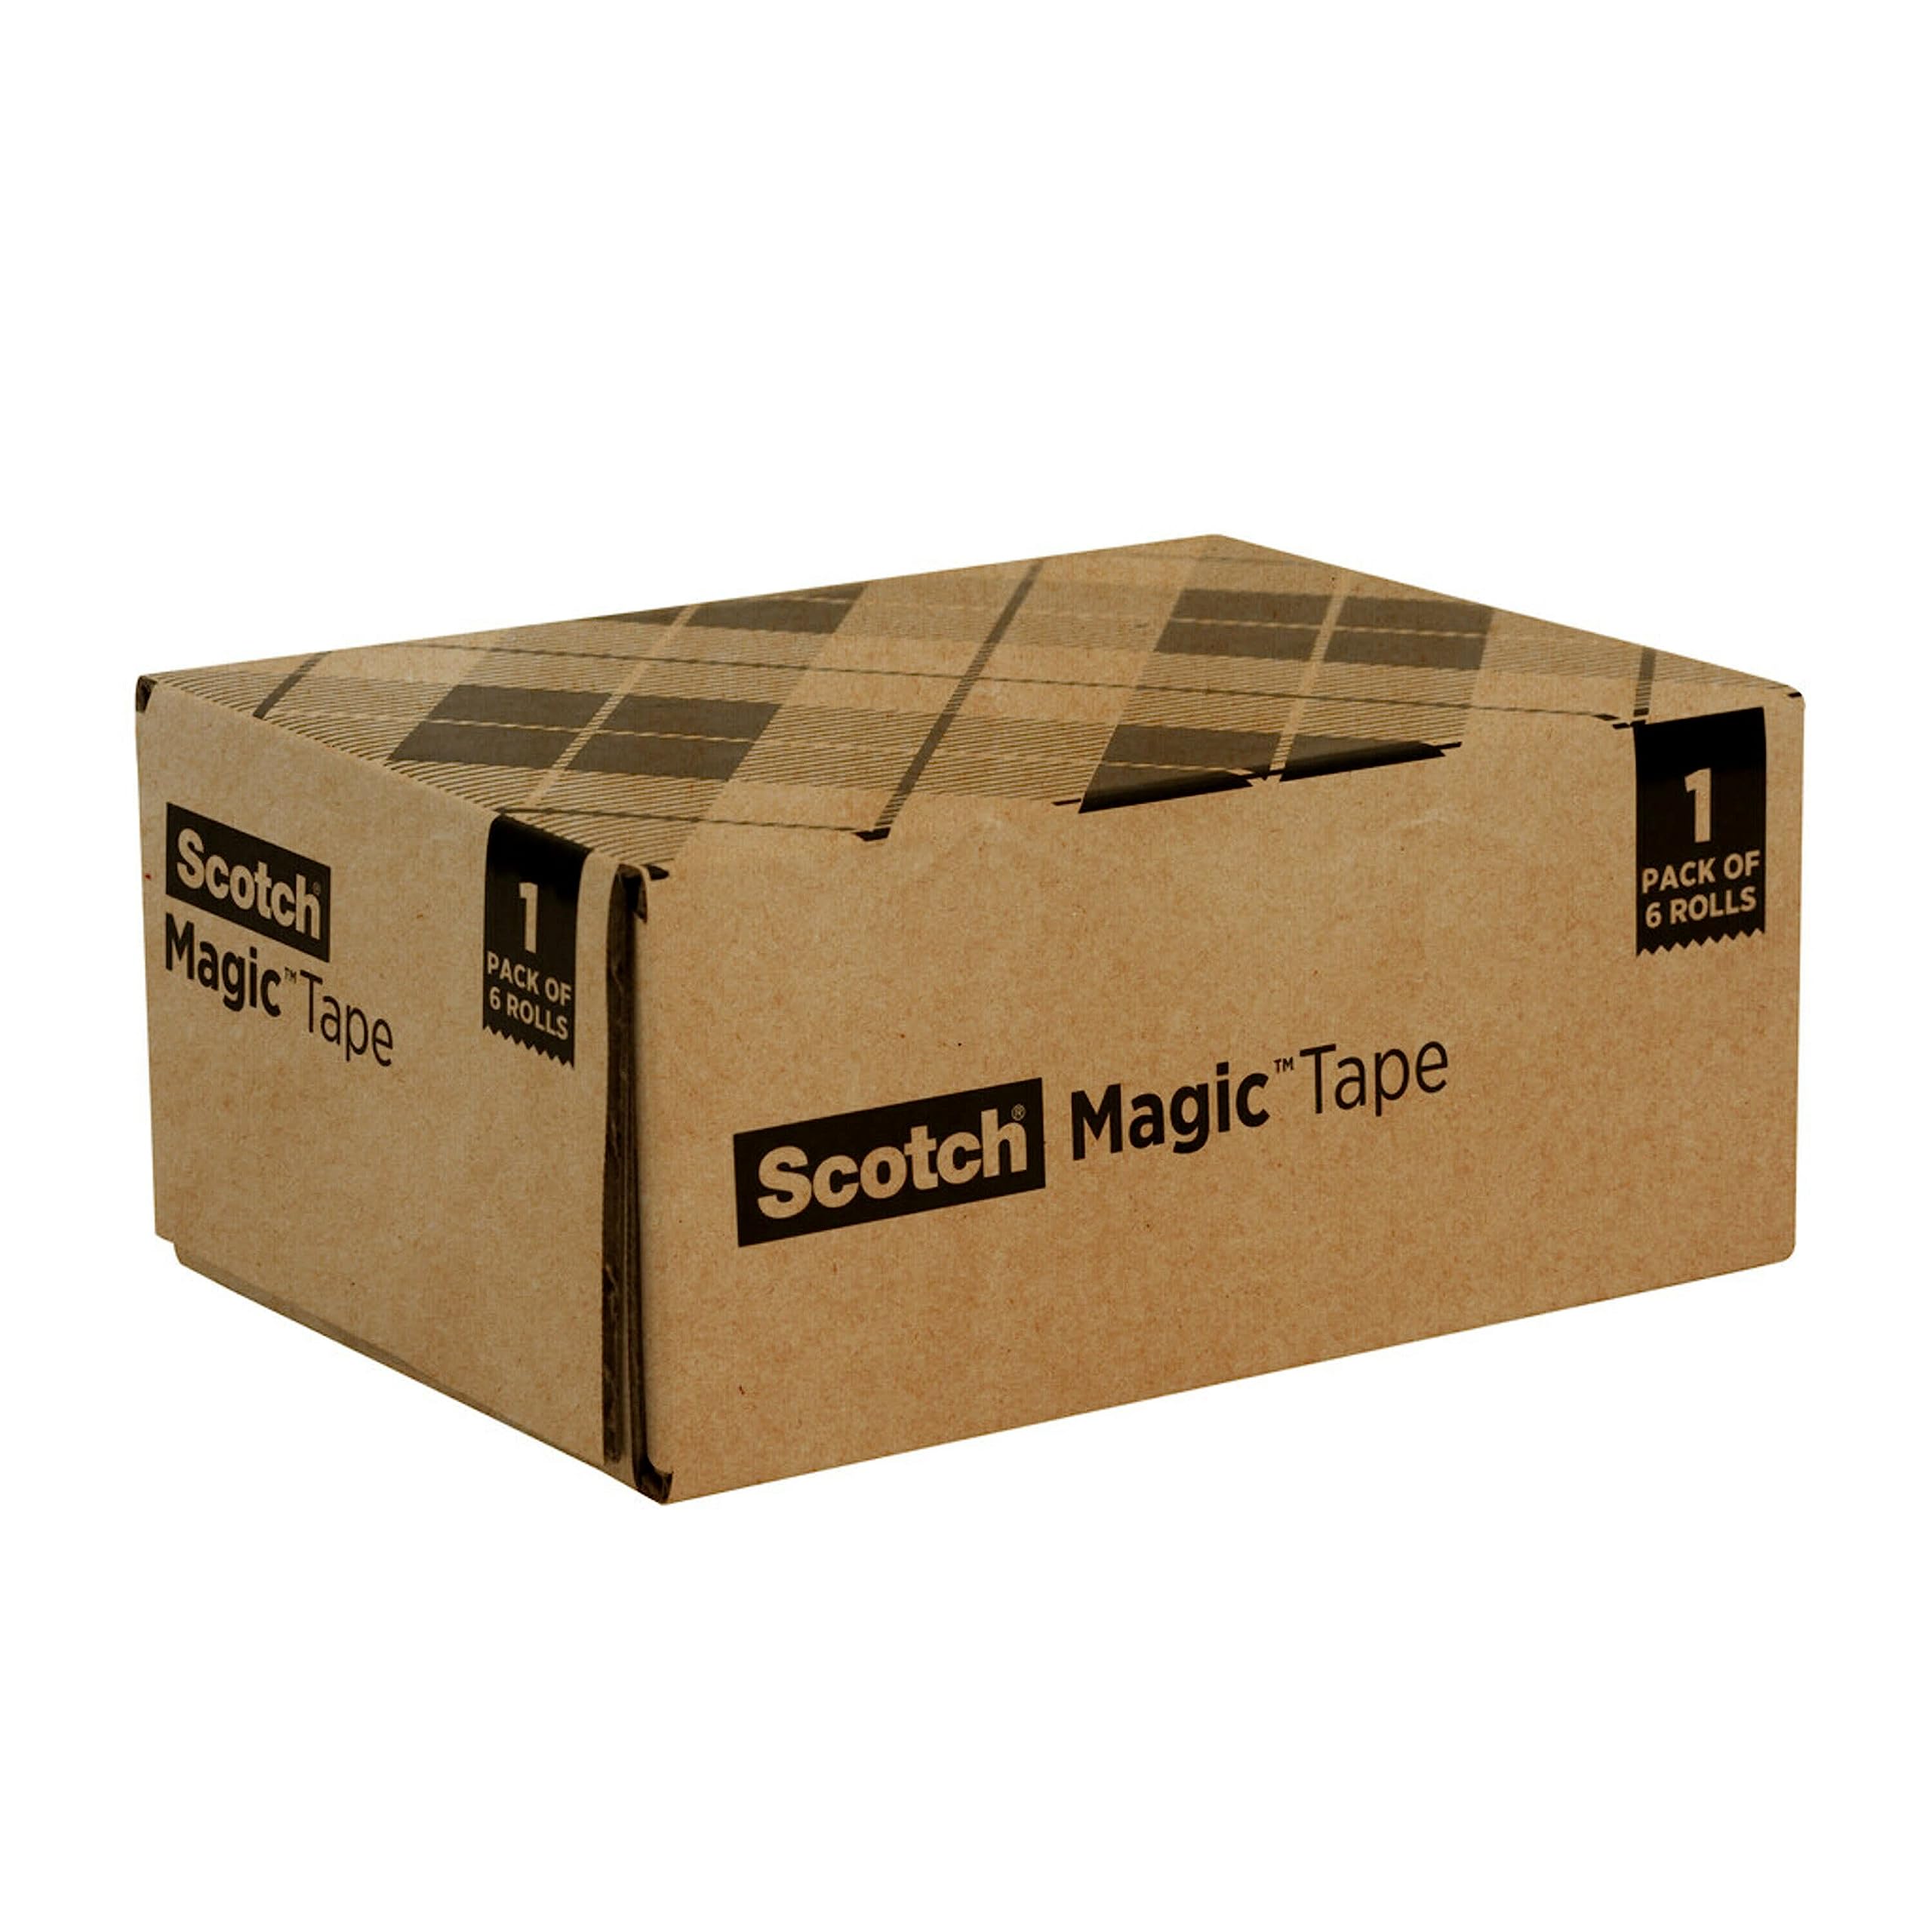 Scotch Magic Tape, Invisible, Back to School Supplies and College Essentials for Students and Teachers, 6 Tape Rolls With Dispensers, 3/4 in x 650 inches